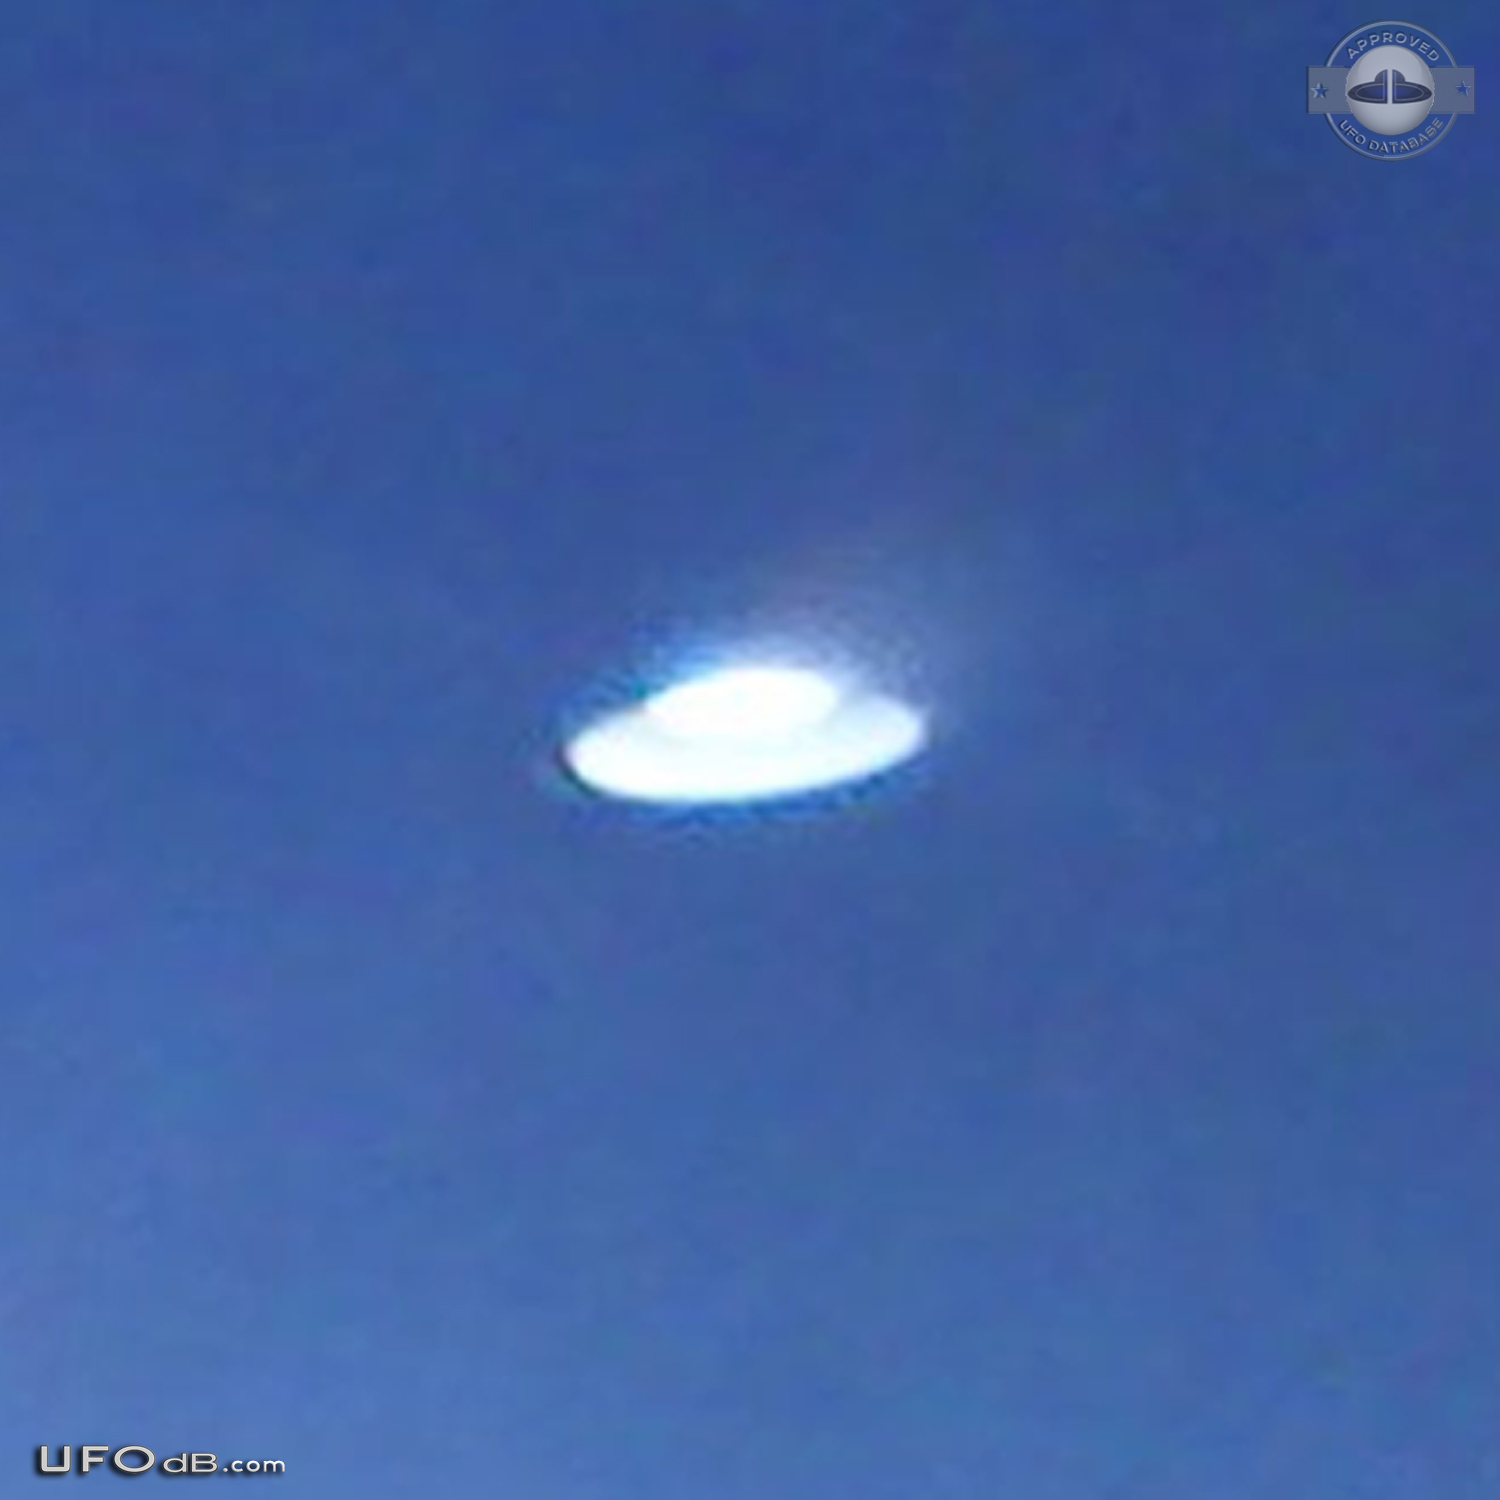 Two Saucer with dome UFOs caught on Picture in the Bahamas - 2012 UFO Picture #495-4